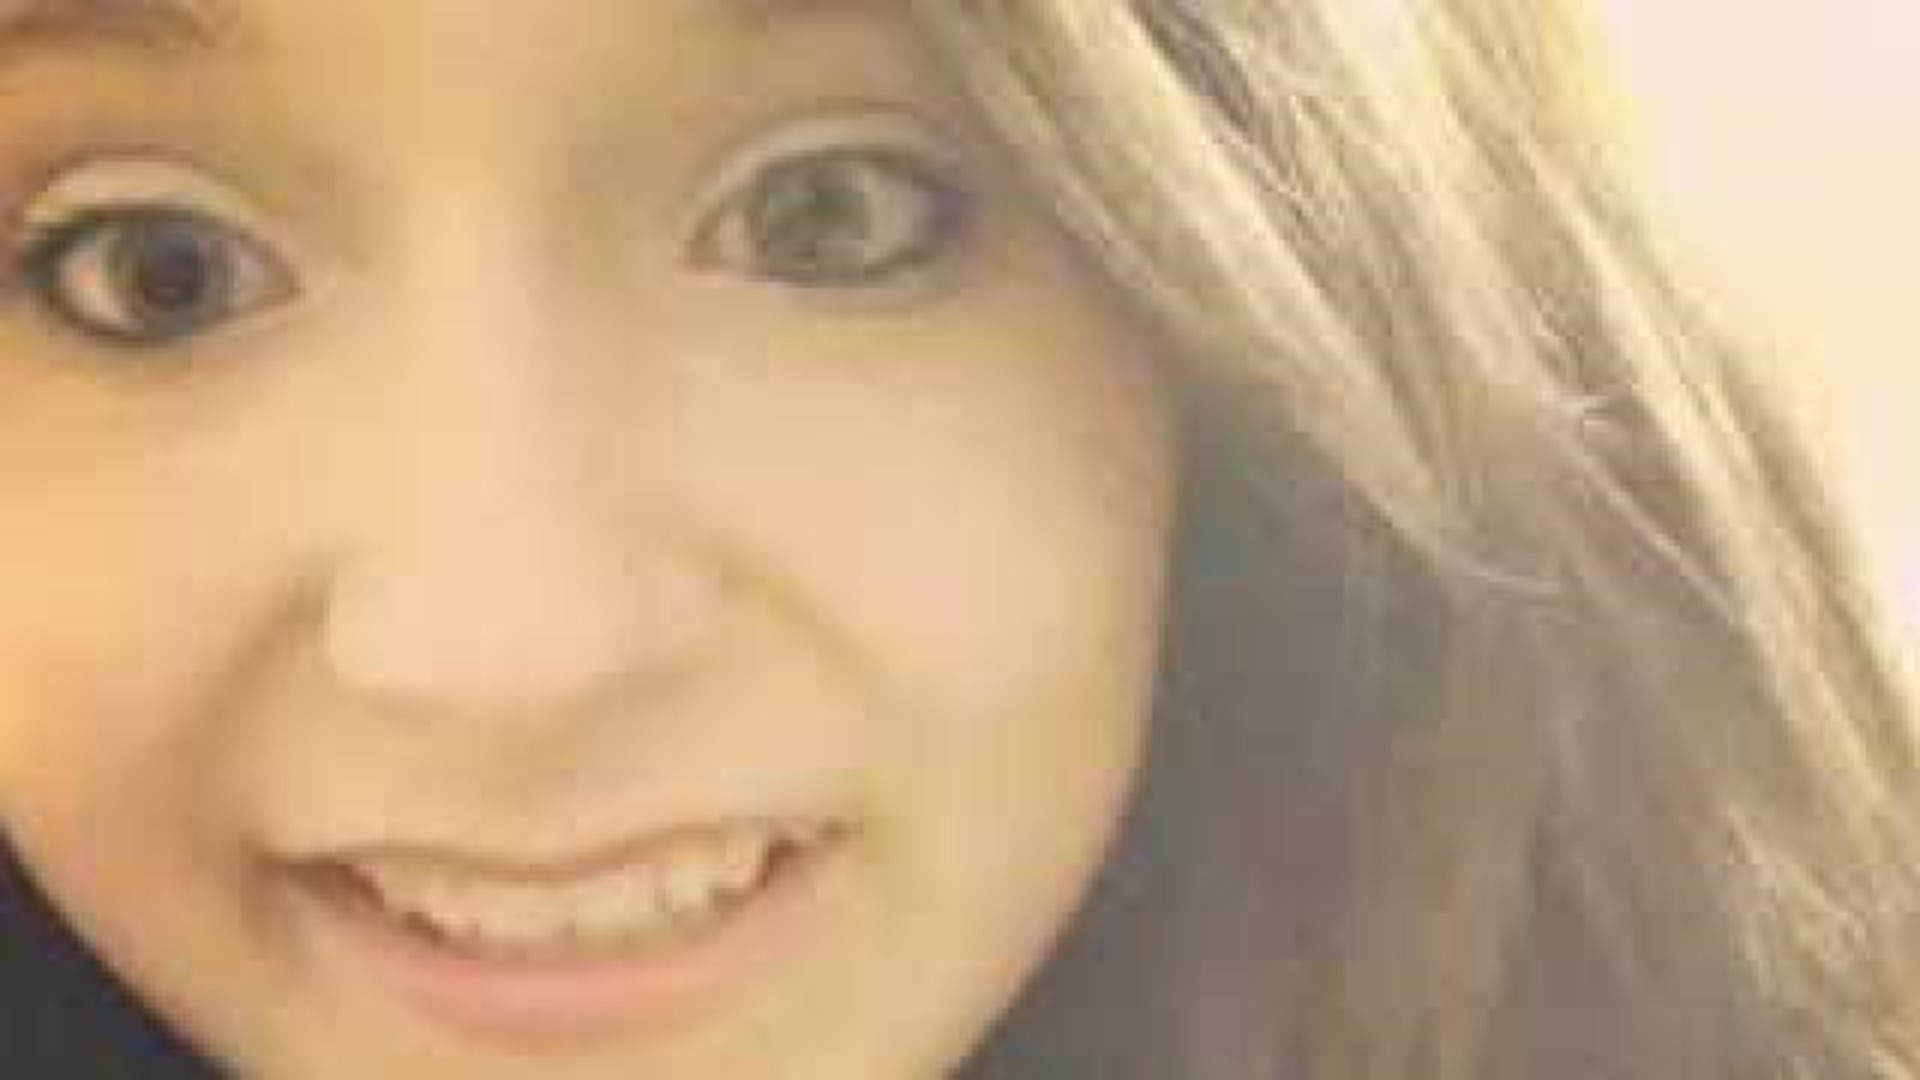 Friends say bullying pushed teen to suicide